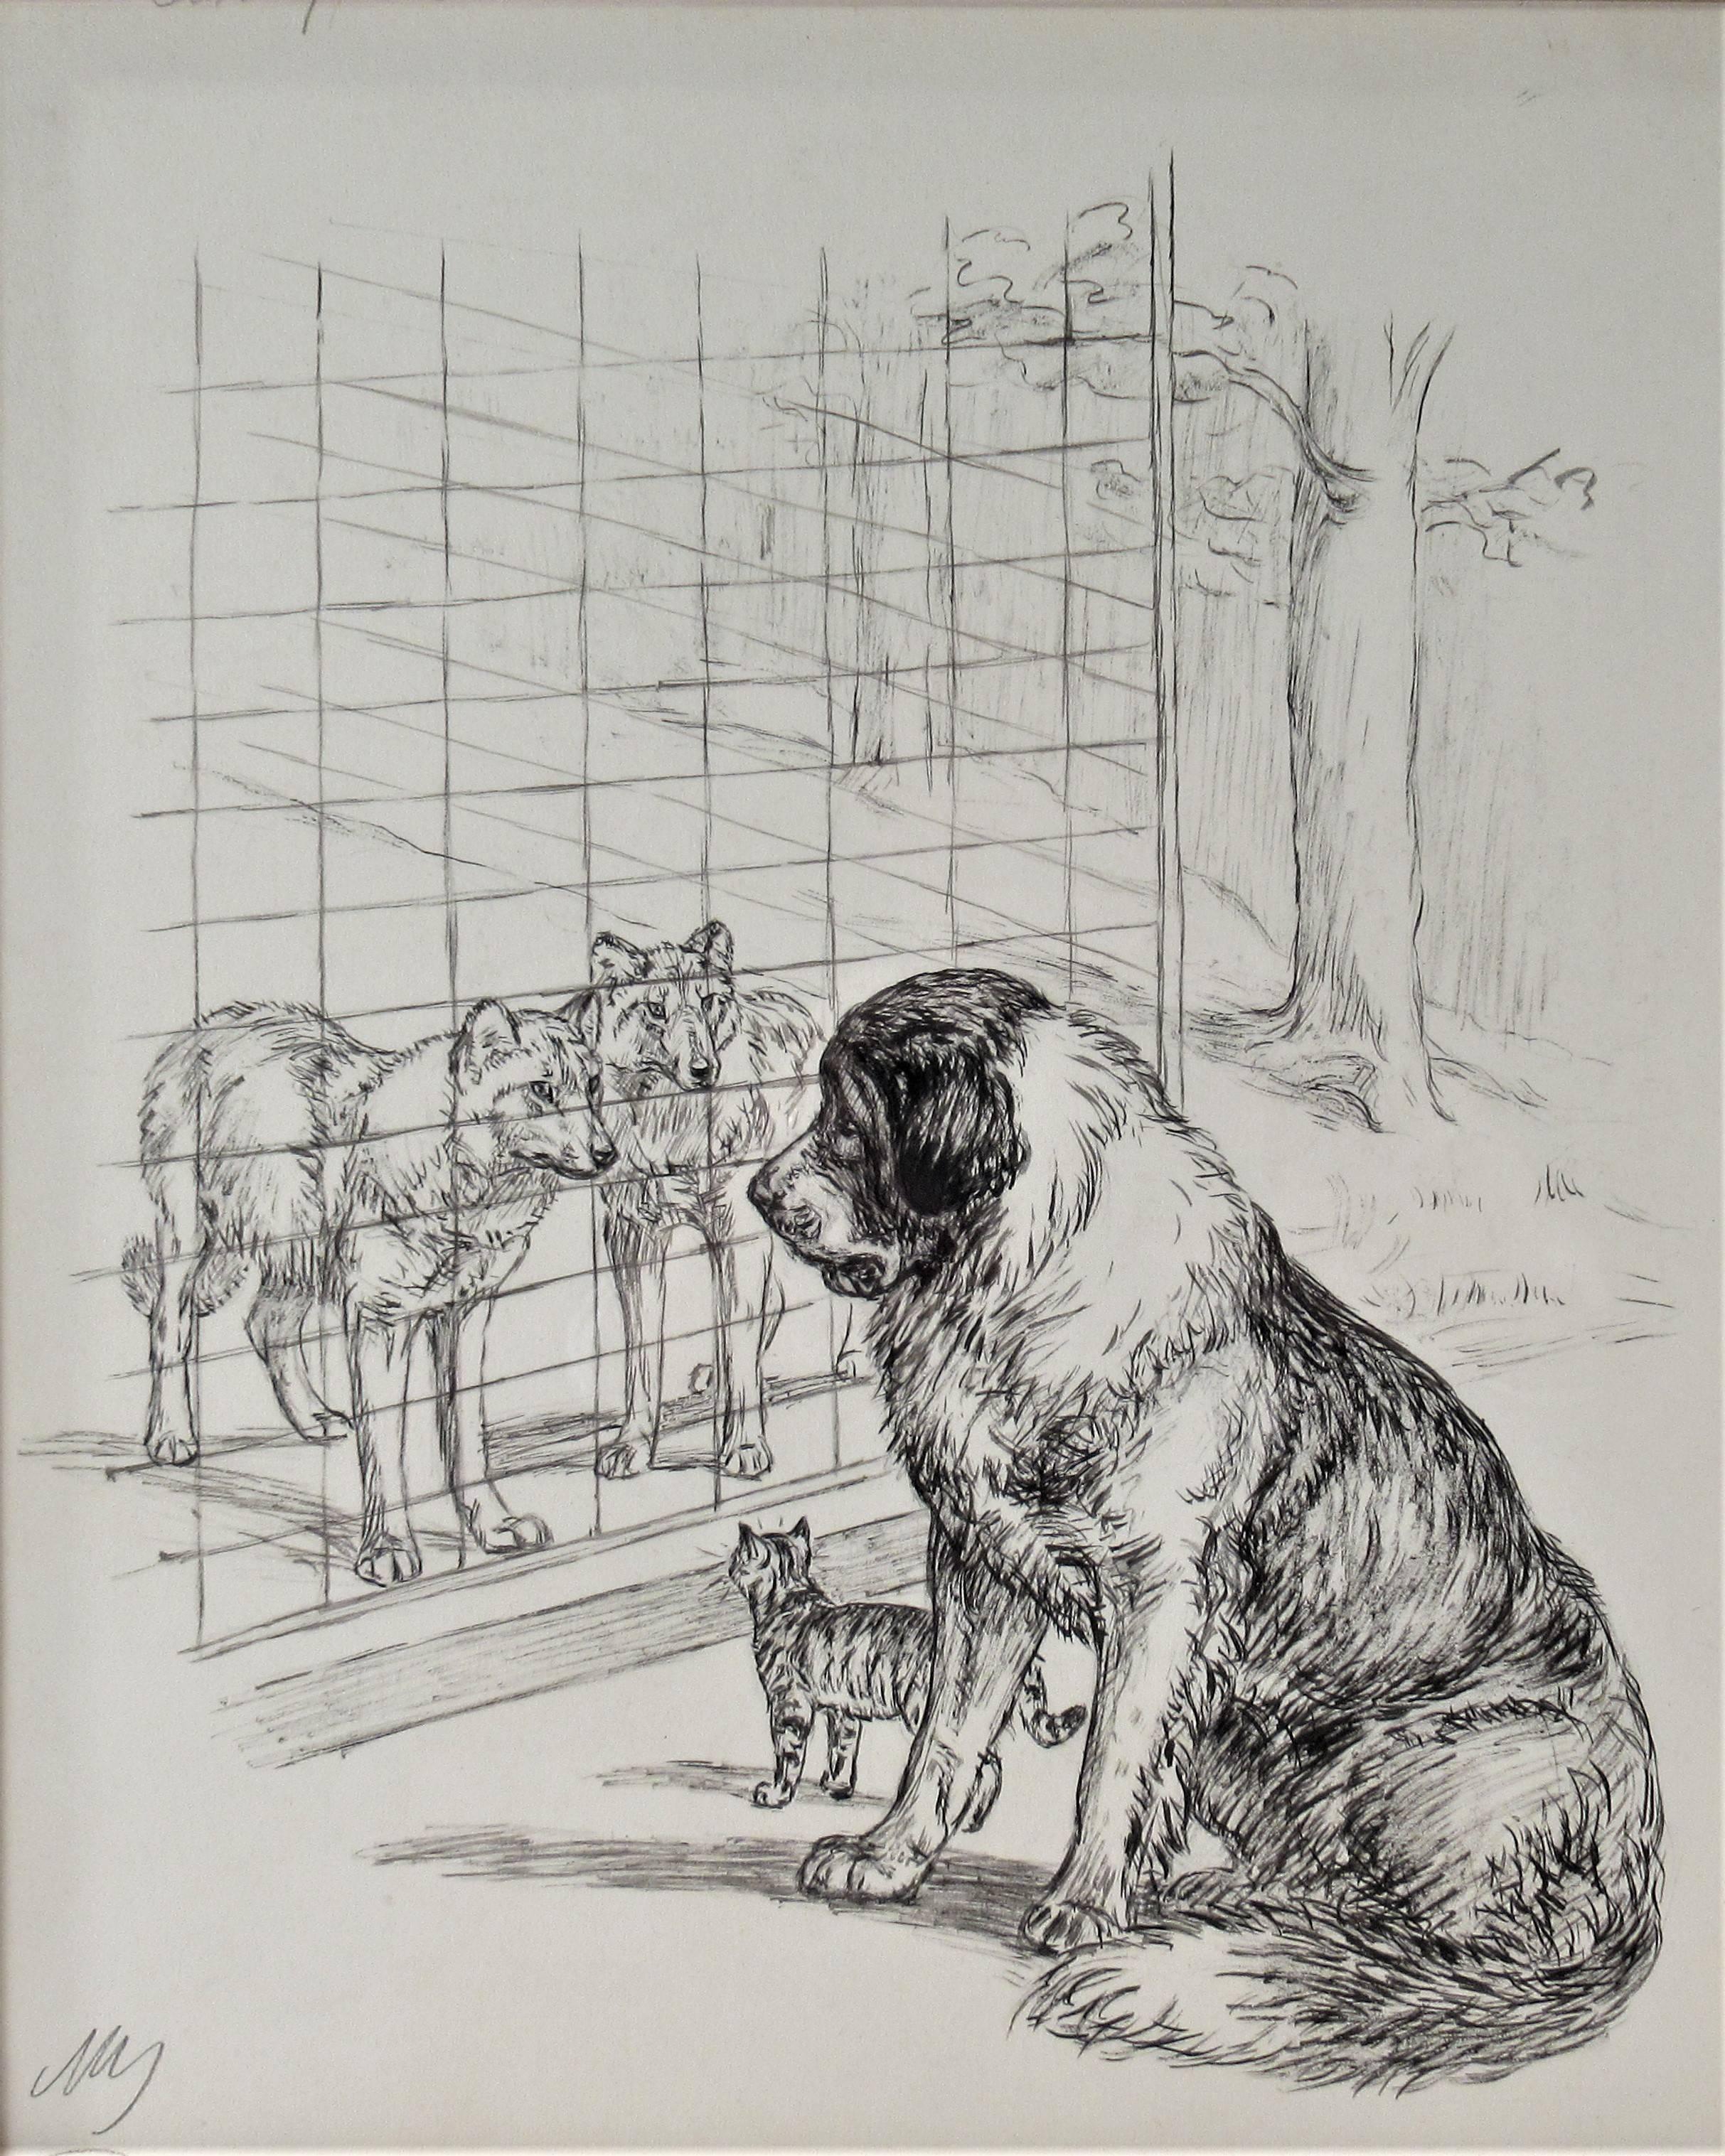  Dogs and Cat Looking at Each Other - Art by Margaret Sweet Johnson